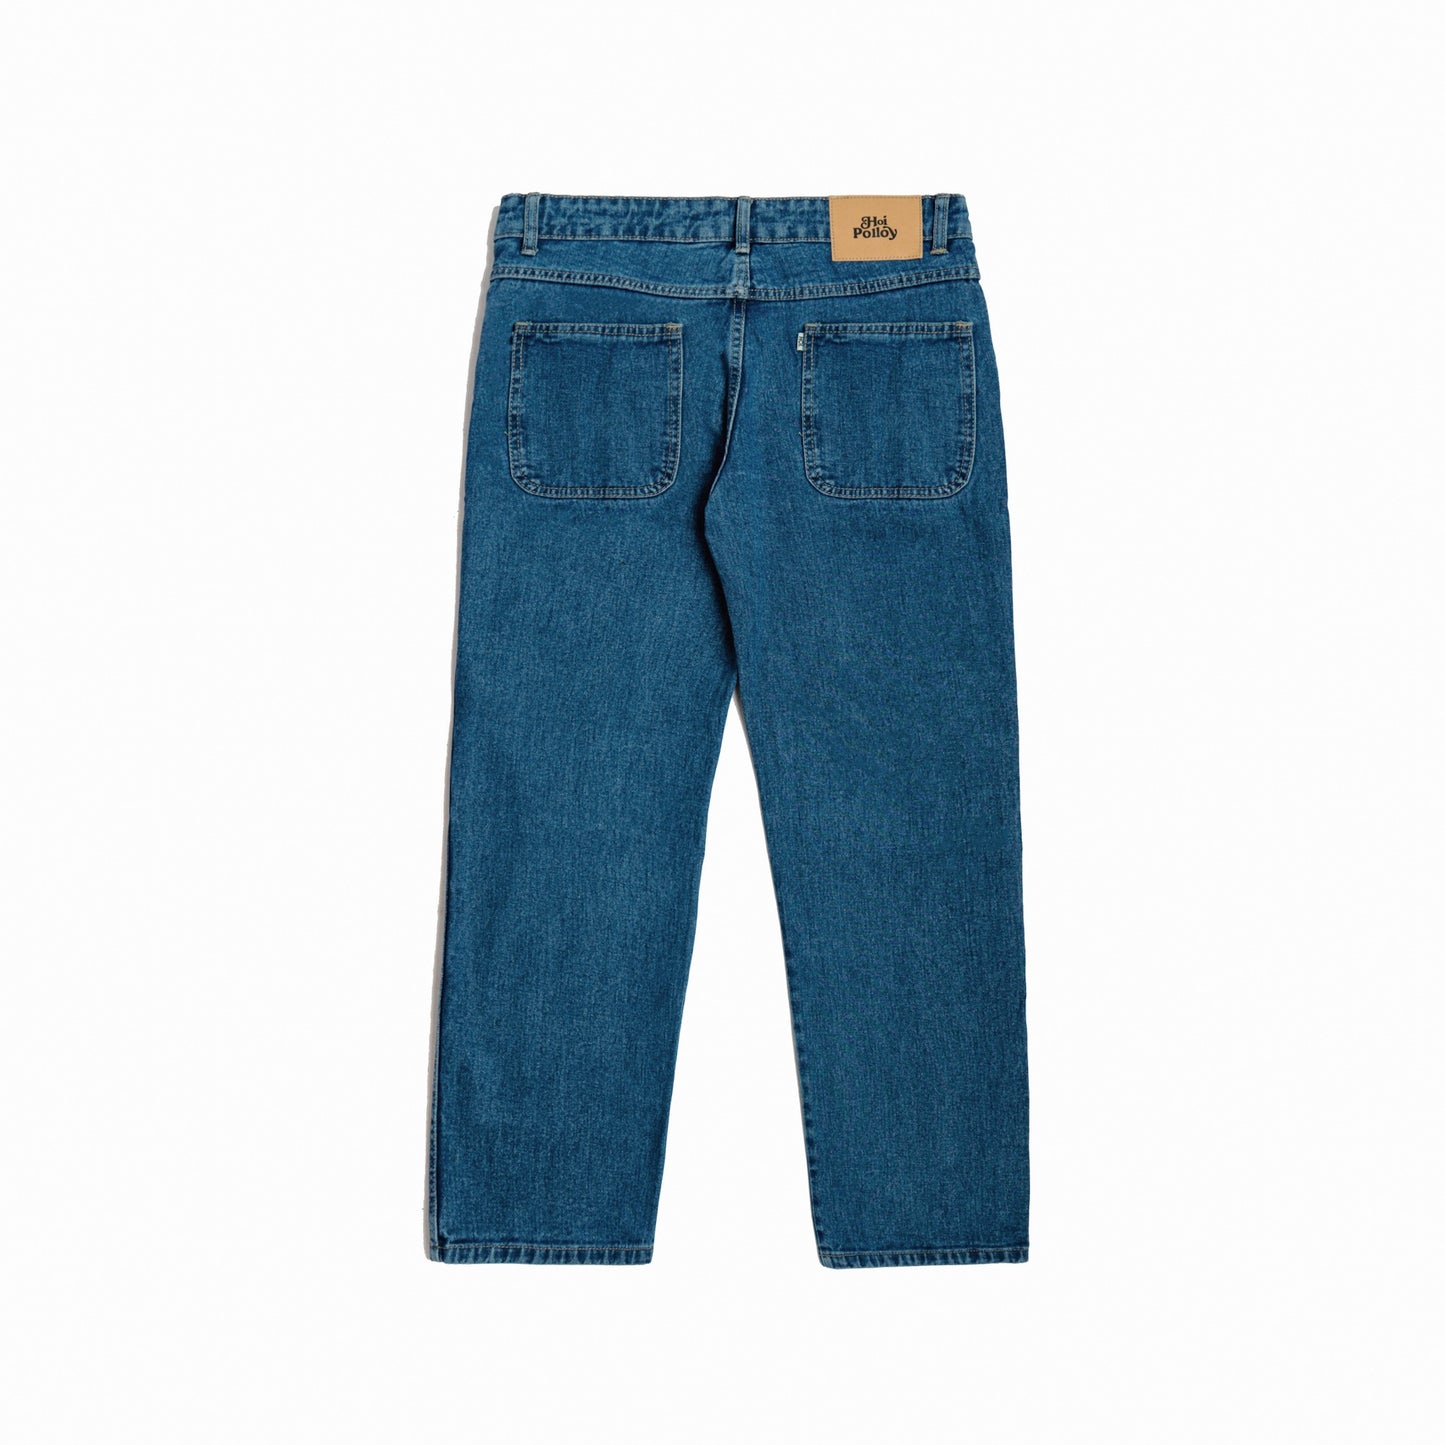 Chief Jeans Classic Blue